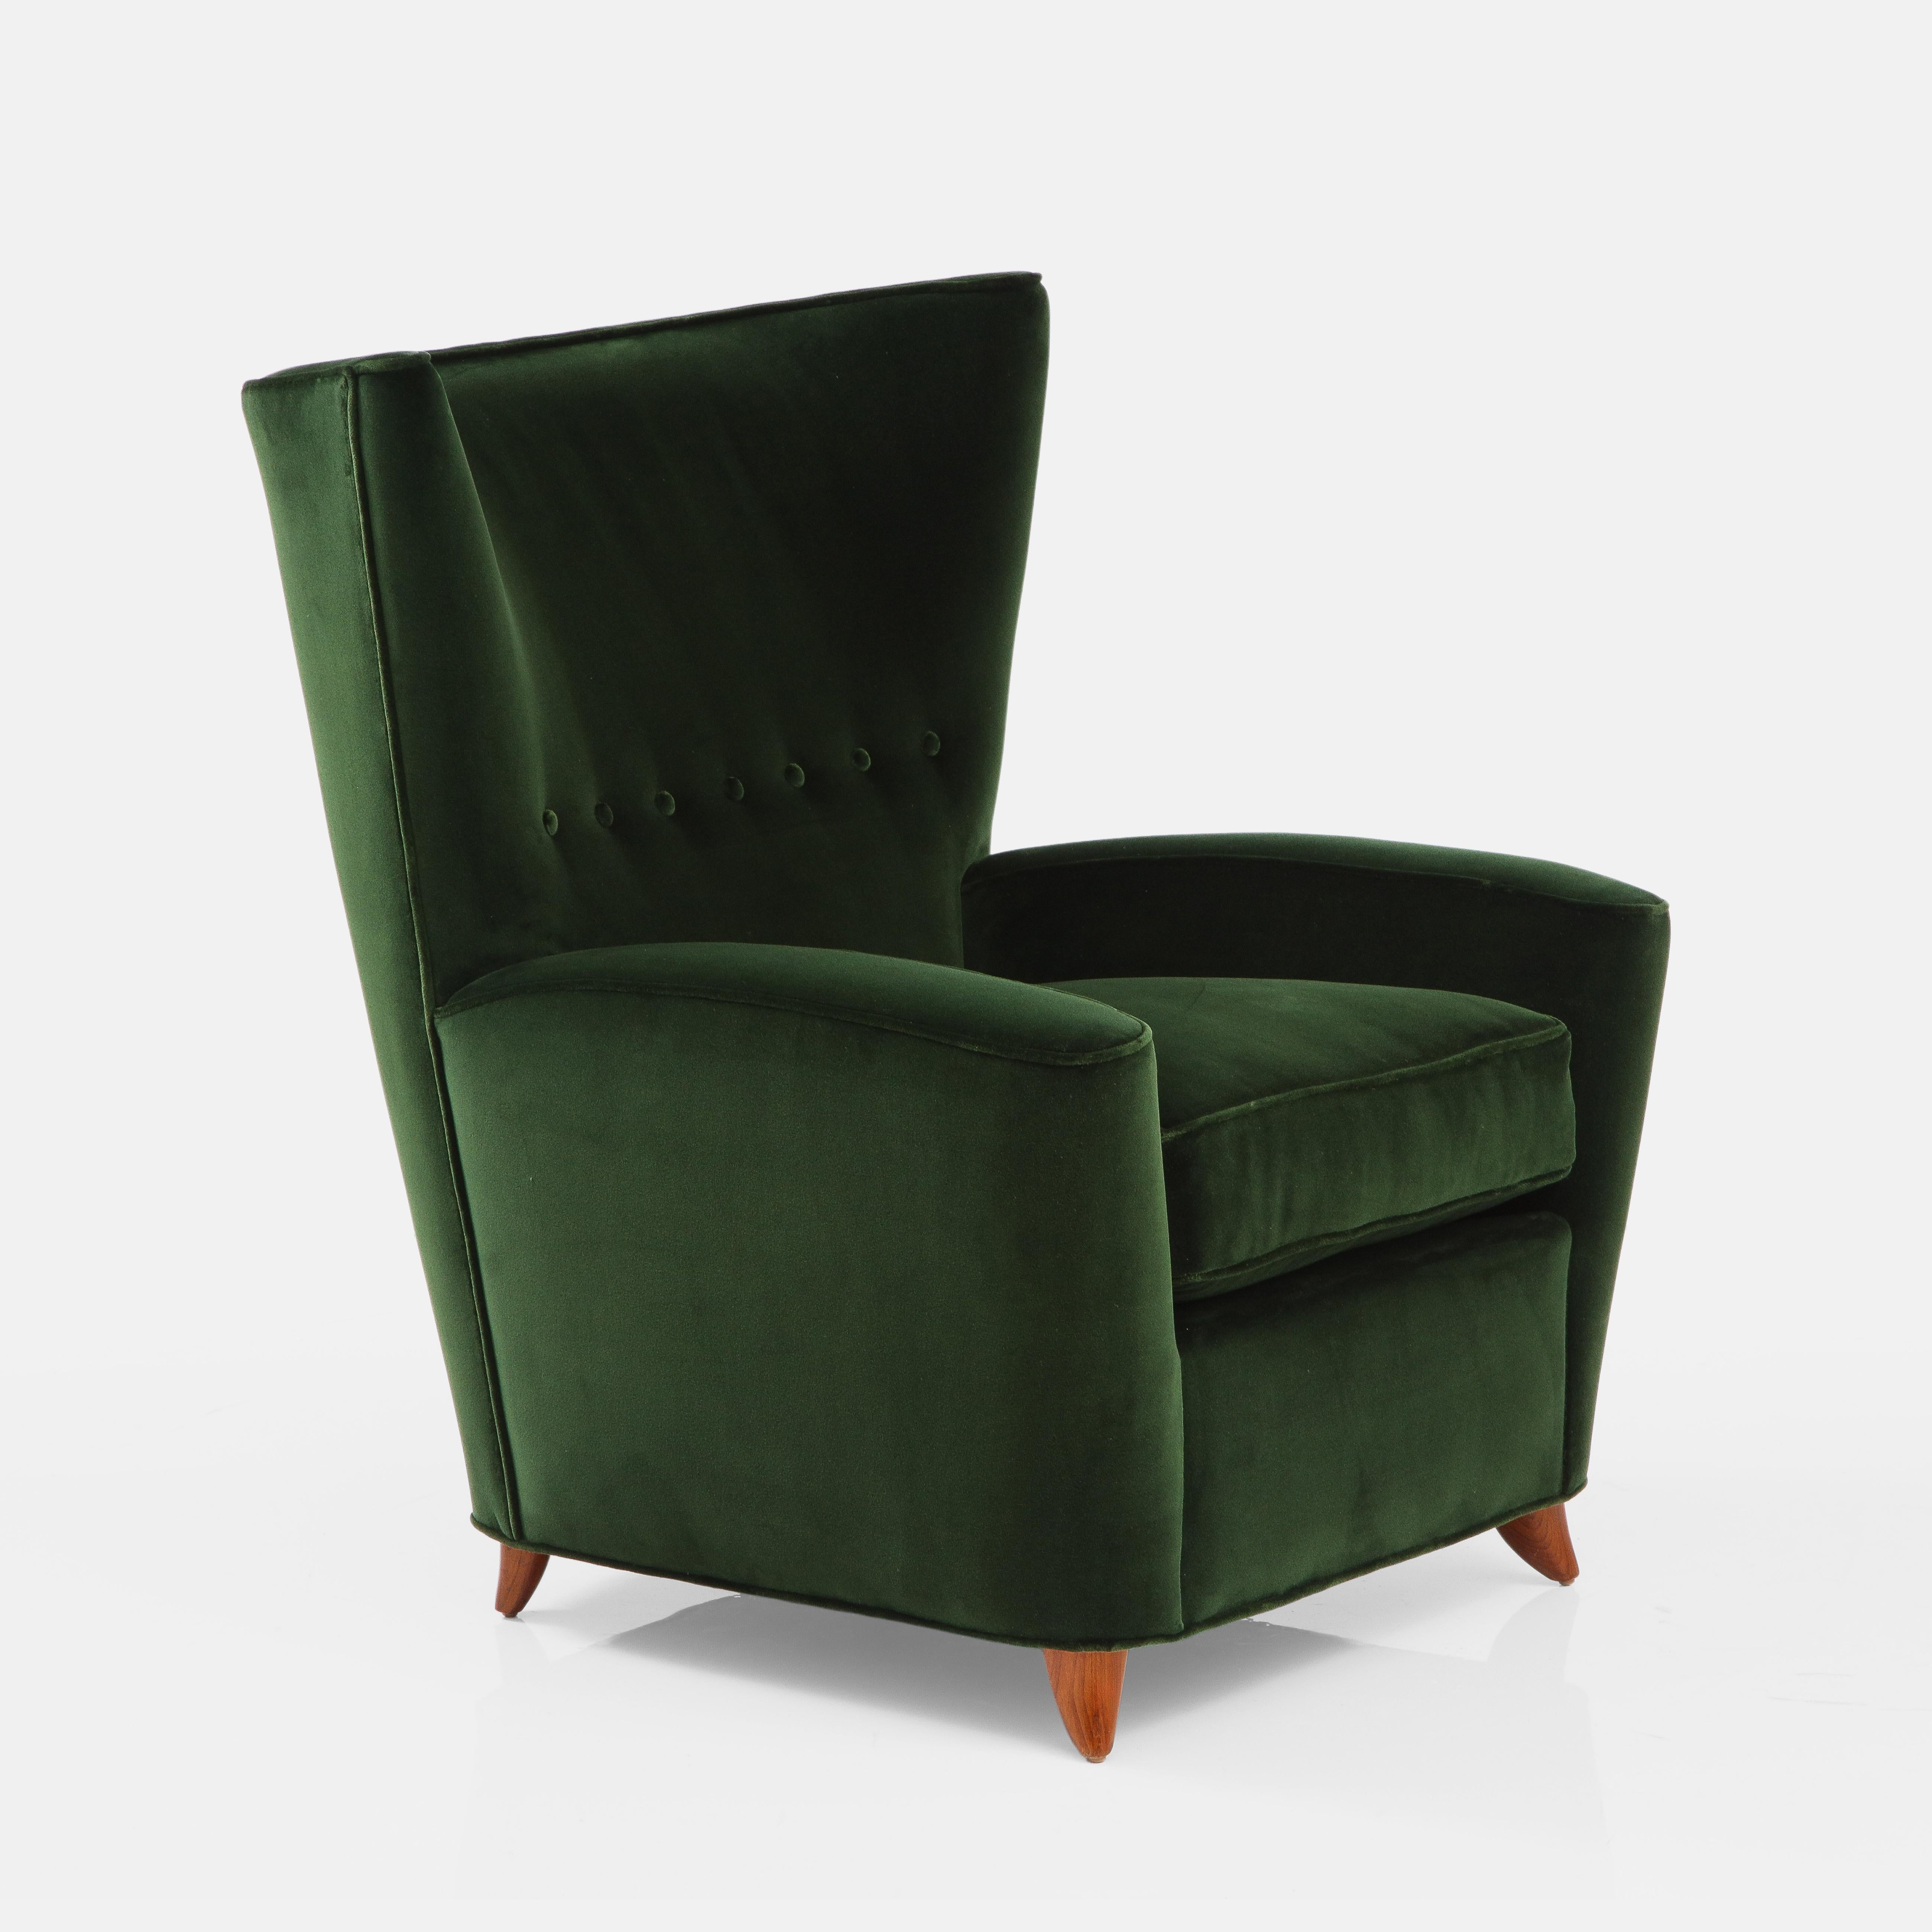 Paolo Buffa Rare Pair of Lounge Chair in Emerald Velvet, Italy, 1950s 2